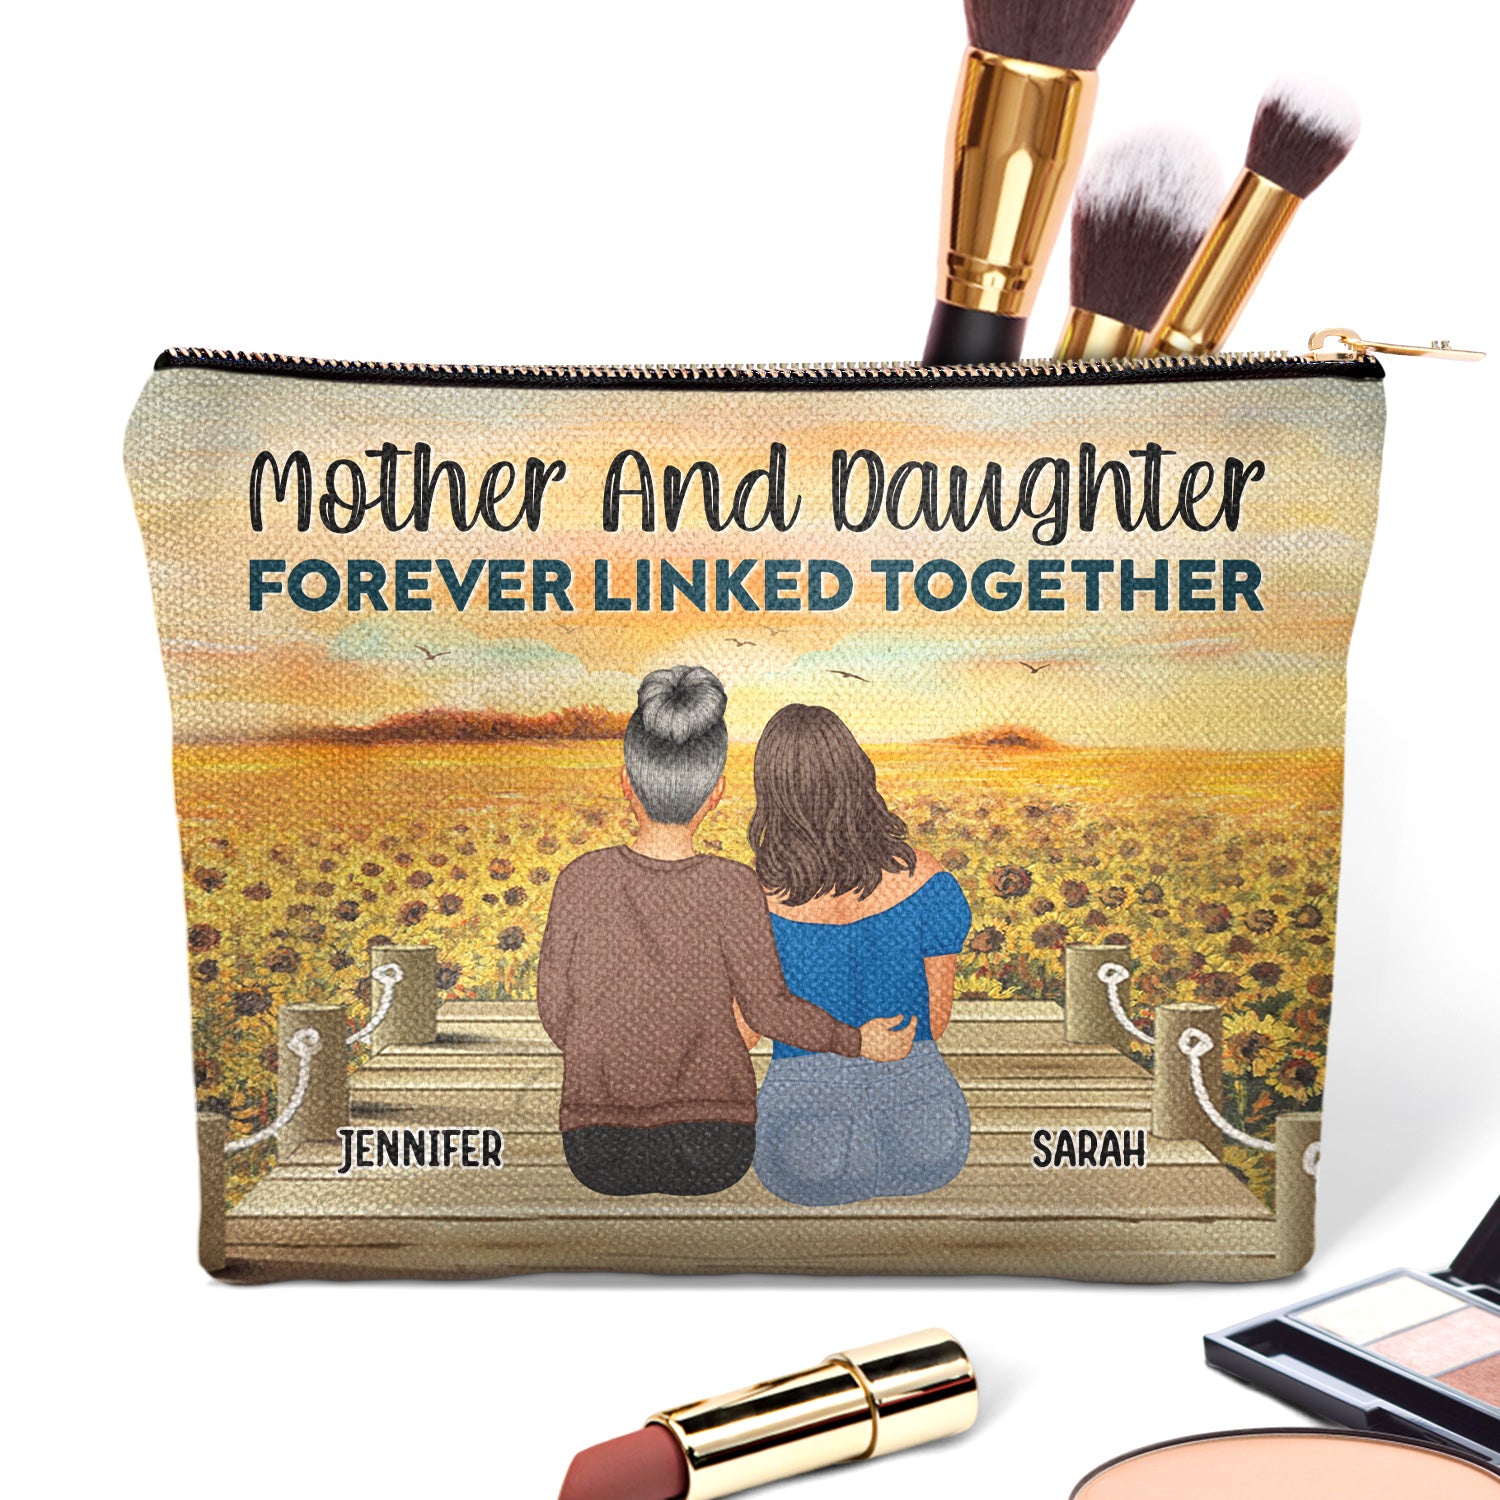 Mother & Daughter Forever Linked Together - Birthday, Loving Gift For Mom, Mum - Personalized Cosmetic Bag